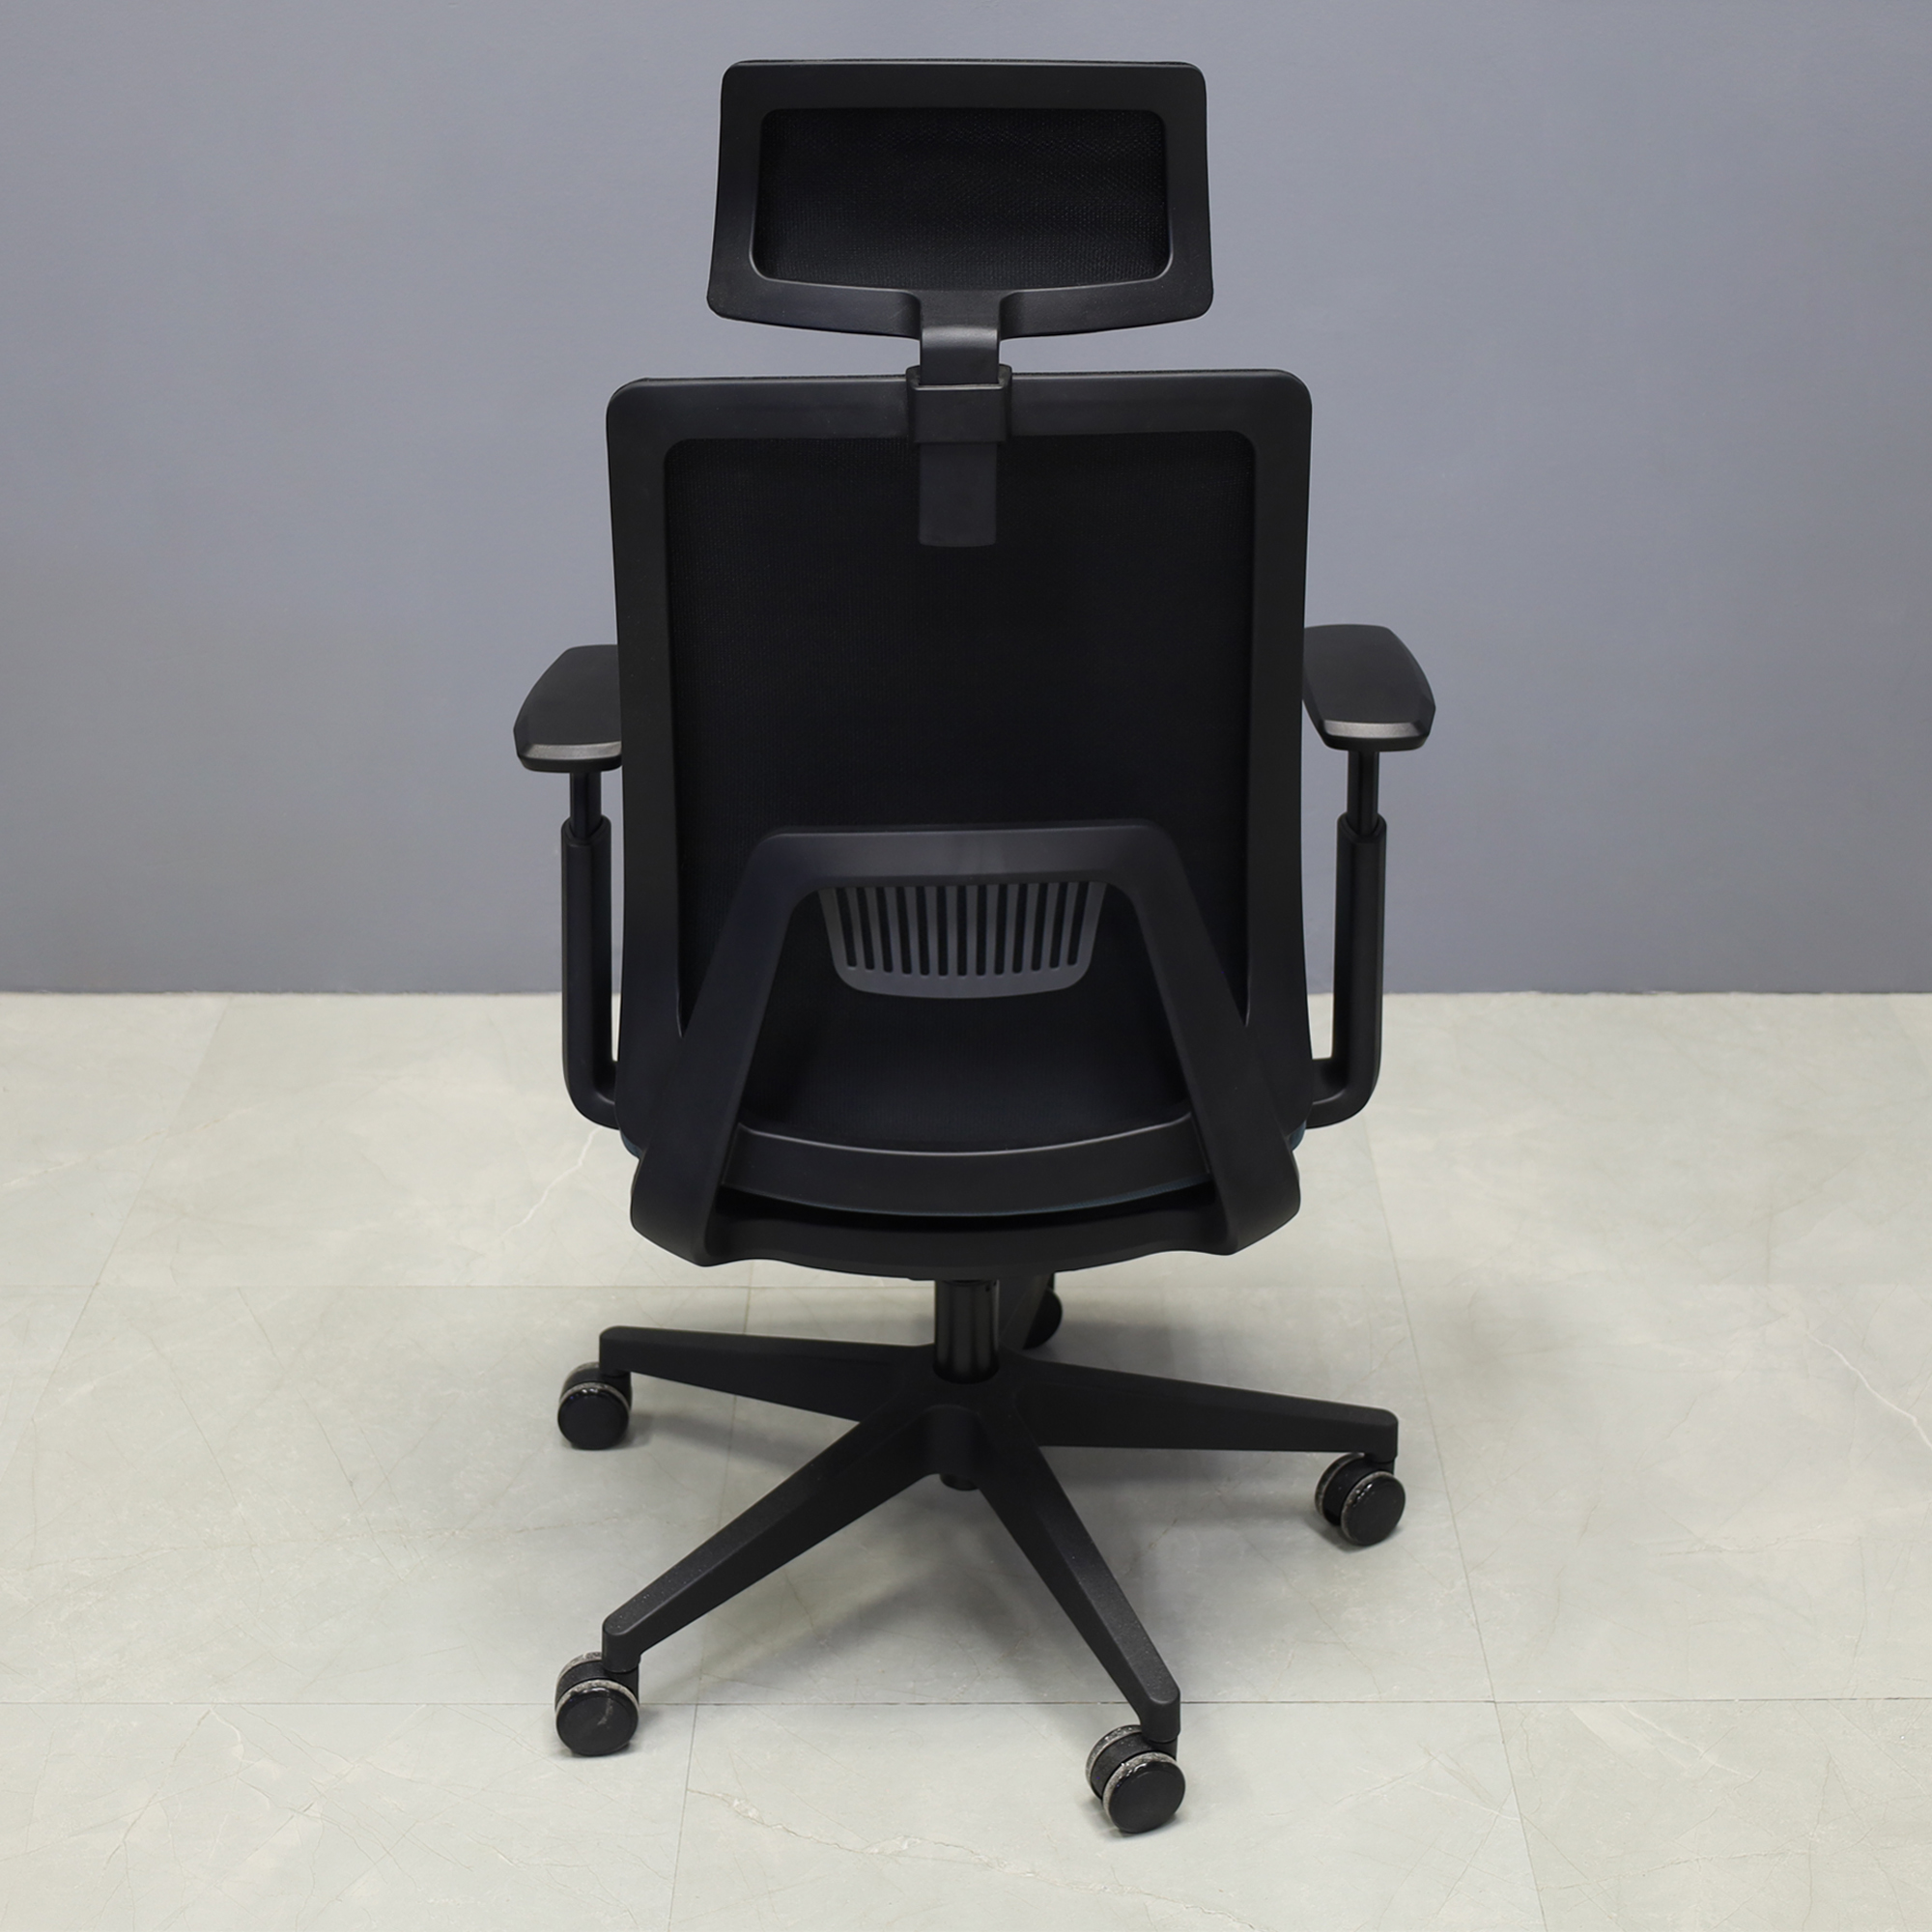 Terra Ergo Office Chair in black mesh back and gray fabric seat cushion, shown here.